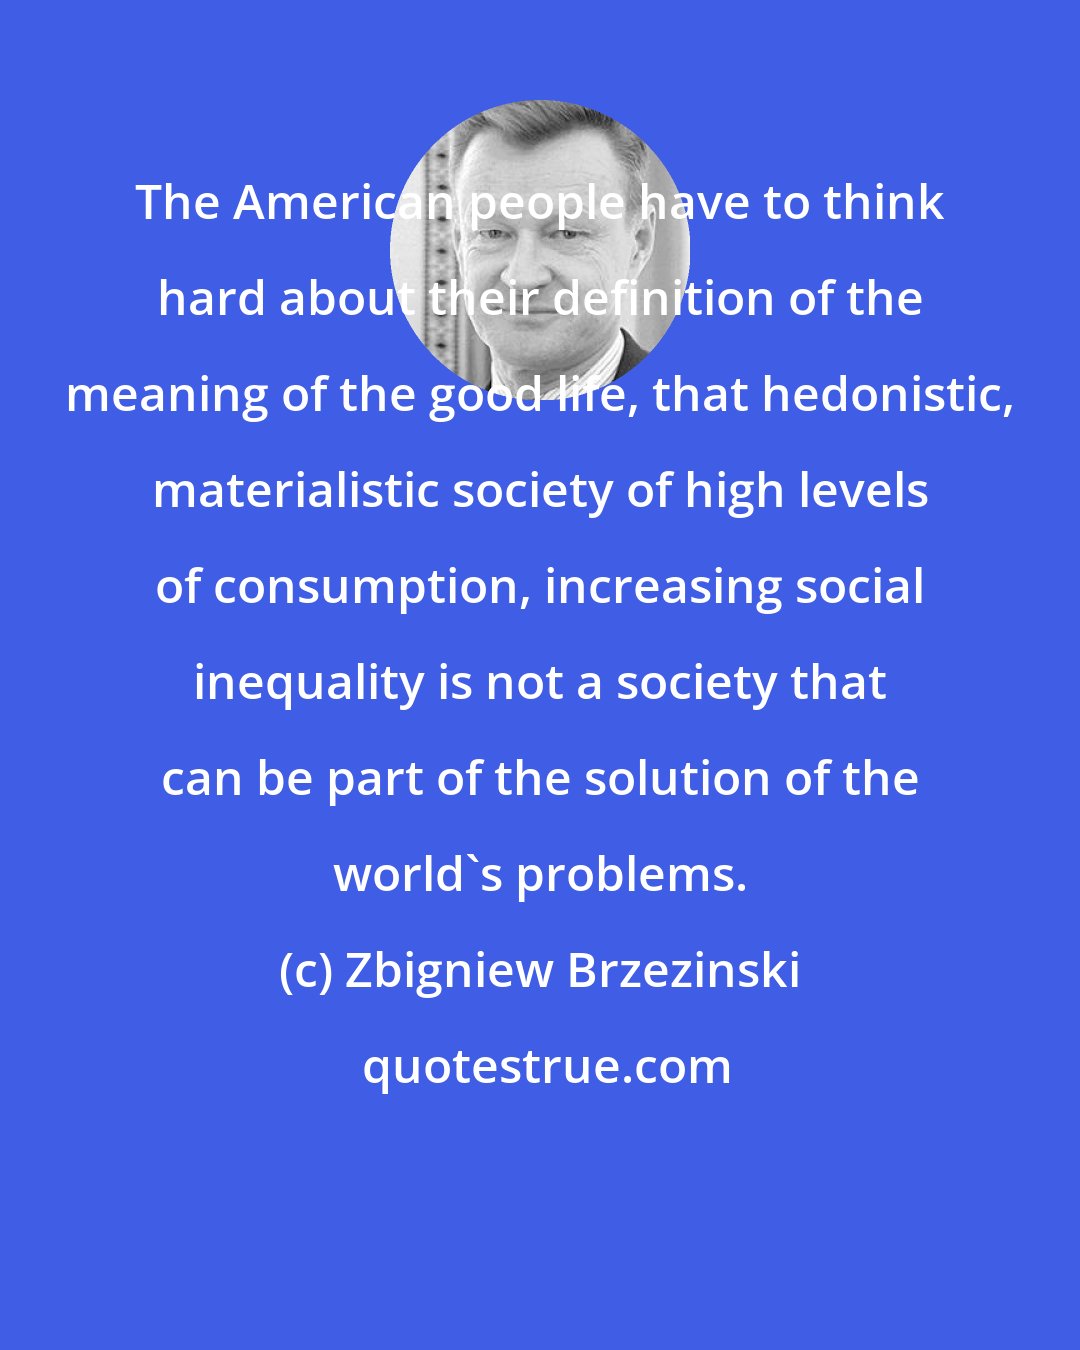 Zbigniew Brzezinski: The American people have to think hard about their definition of the meaning of the good life, that hedonistic, materialistic society of high levels of consumption, increasing social inequality is not a society that can be part of the solution of the world's problems.